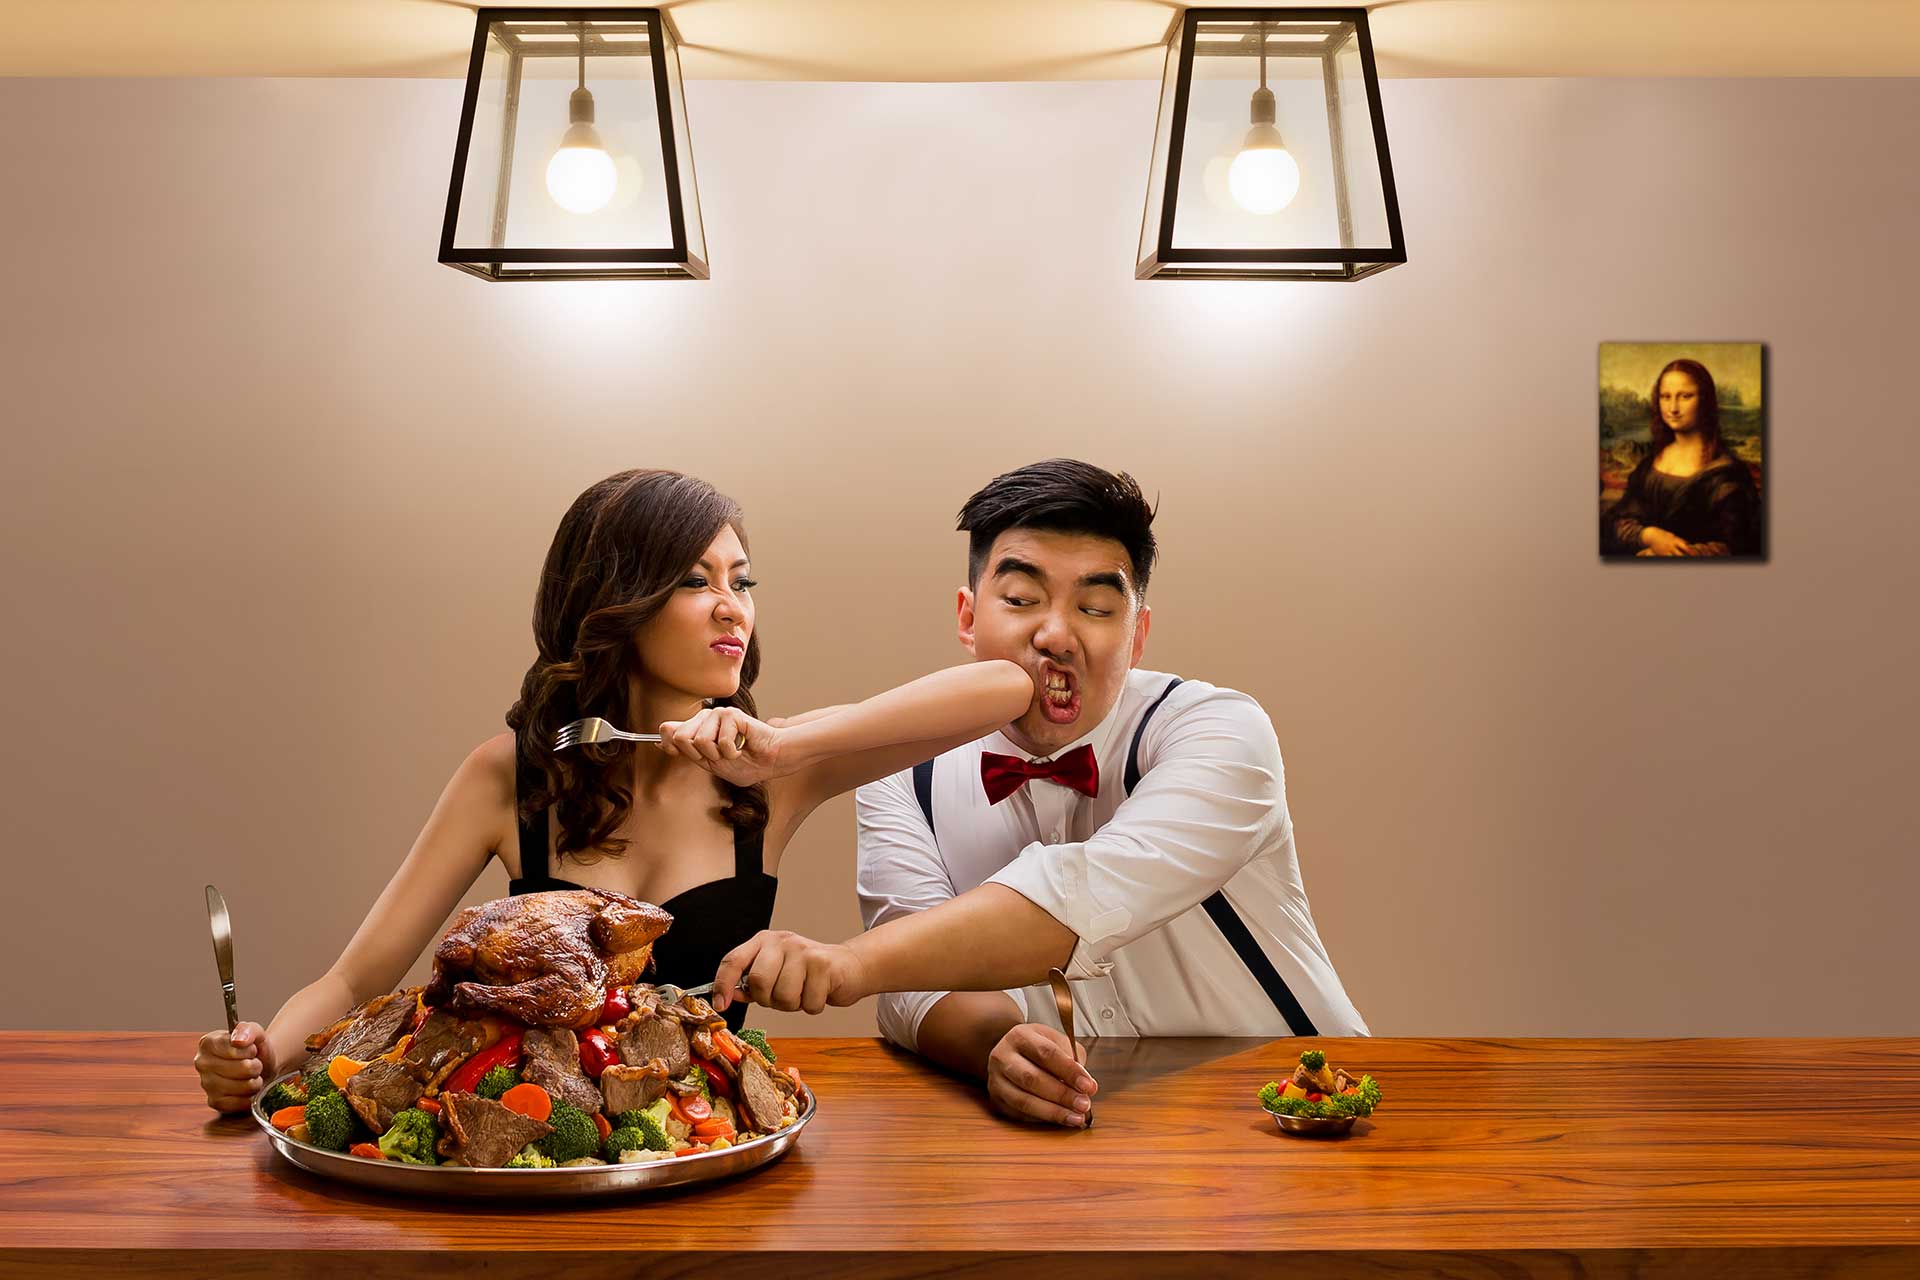 creative pre wedding photography: A couple engages in a humorous battle over a meal